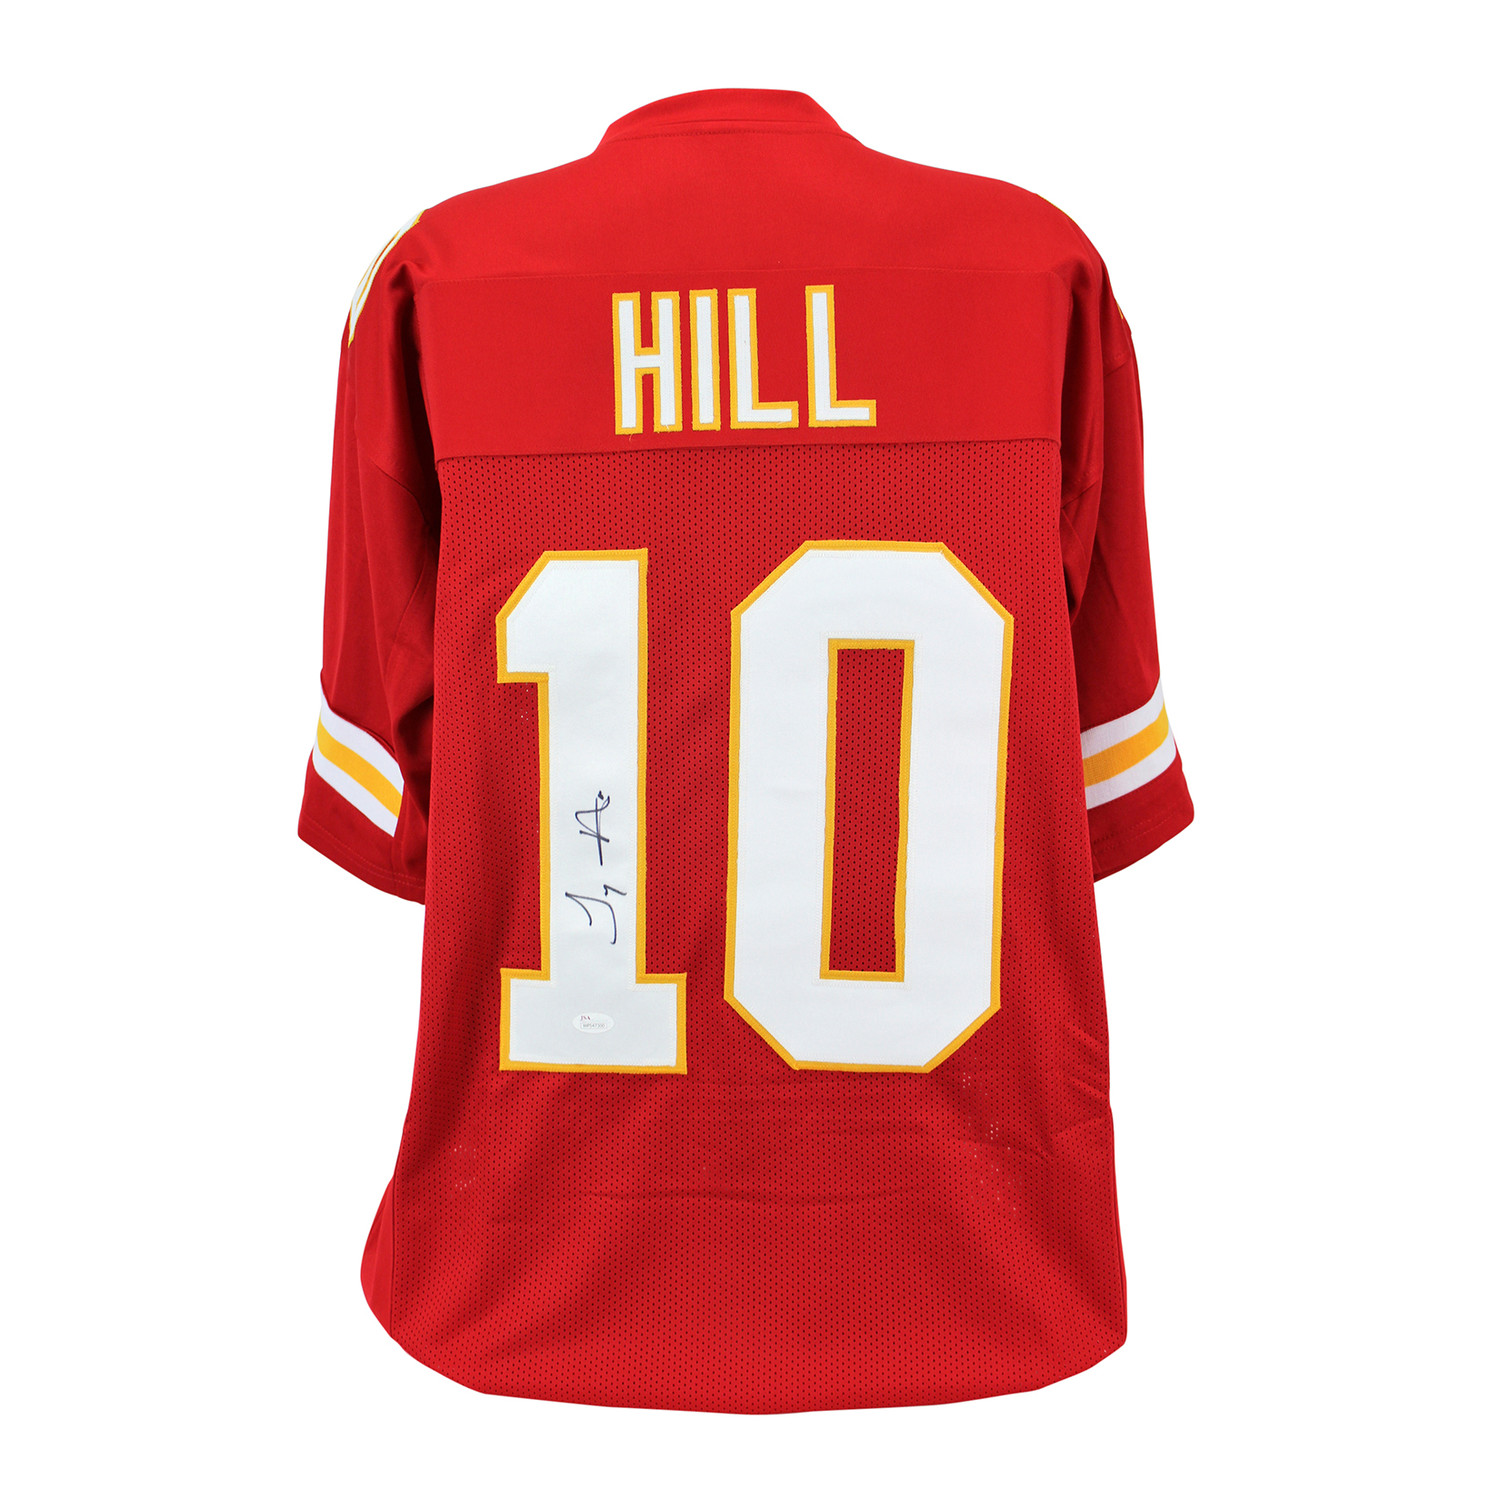 Signed Jersey // Chiefs // Tyreek Hill - Autographed Sports Collectibles - Touch of Modern